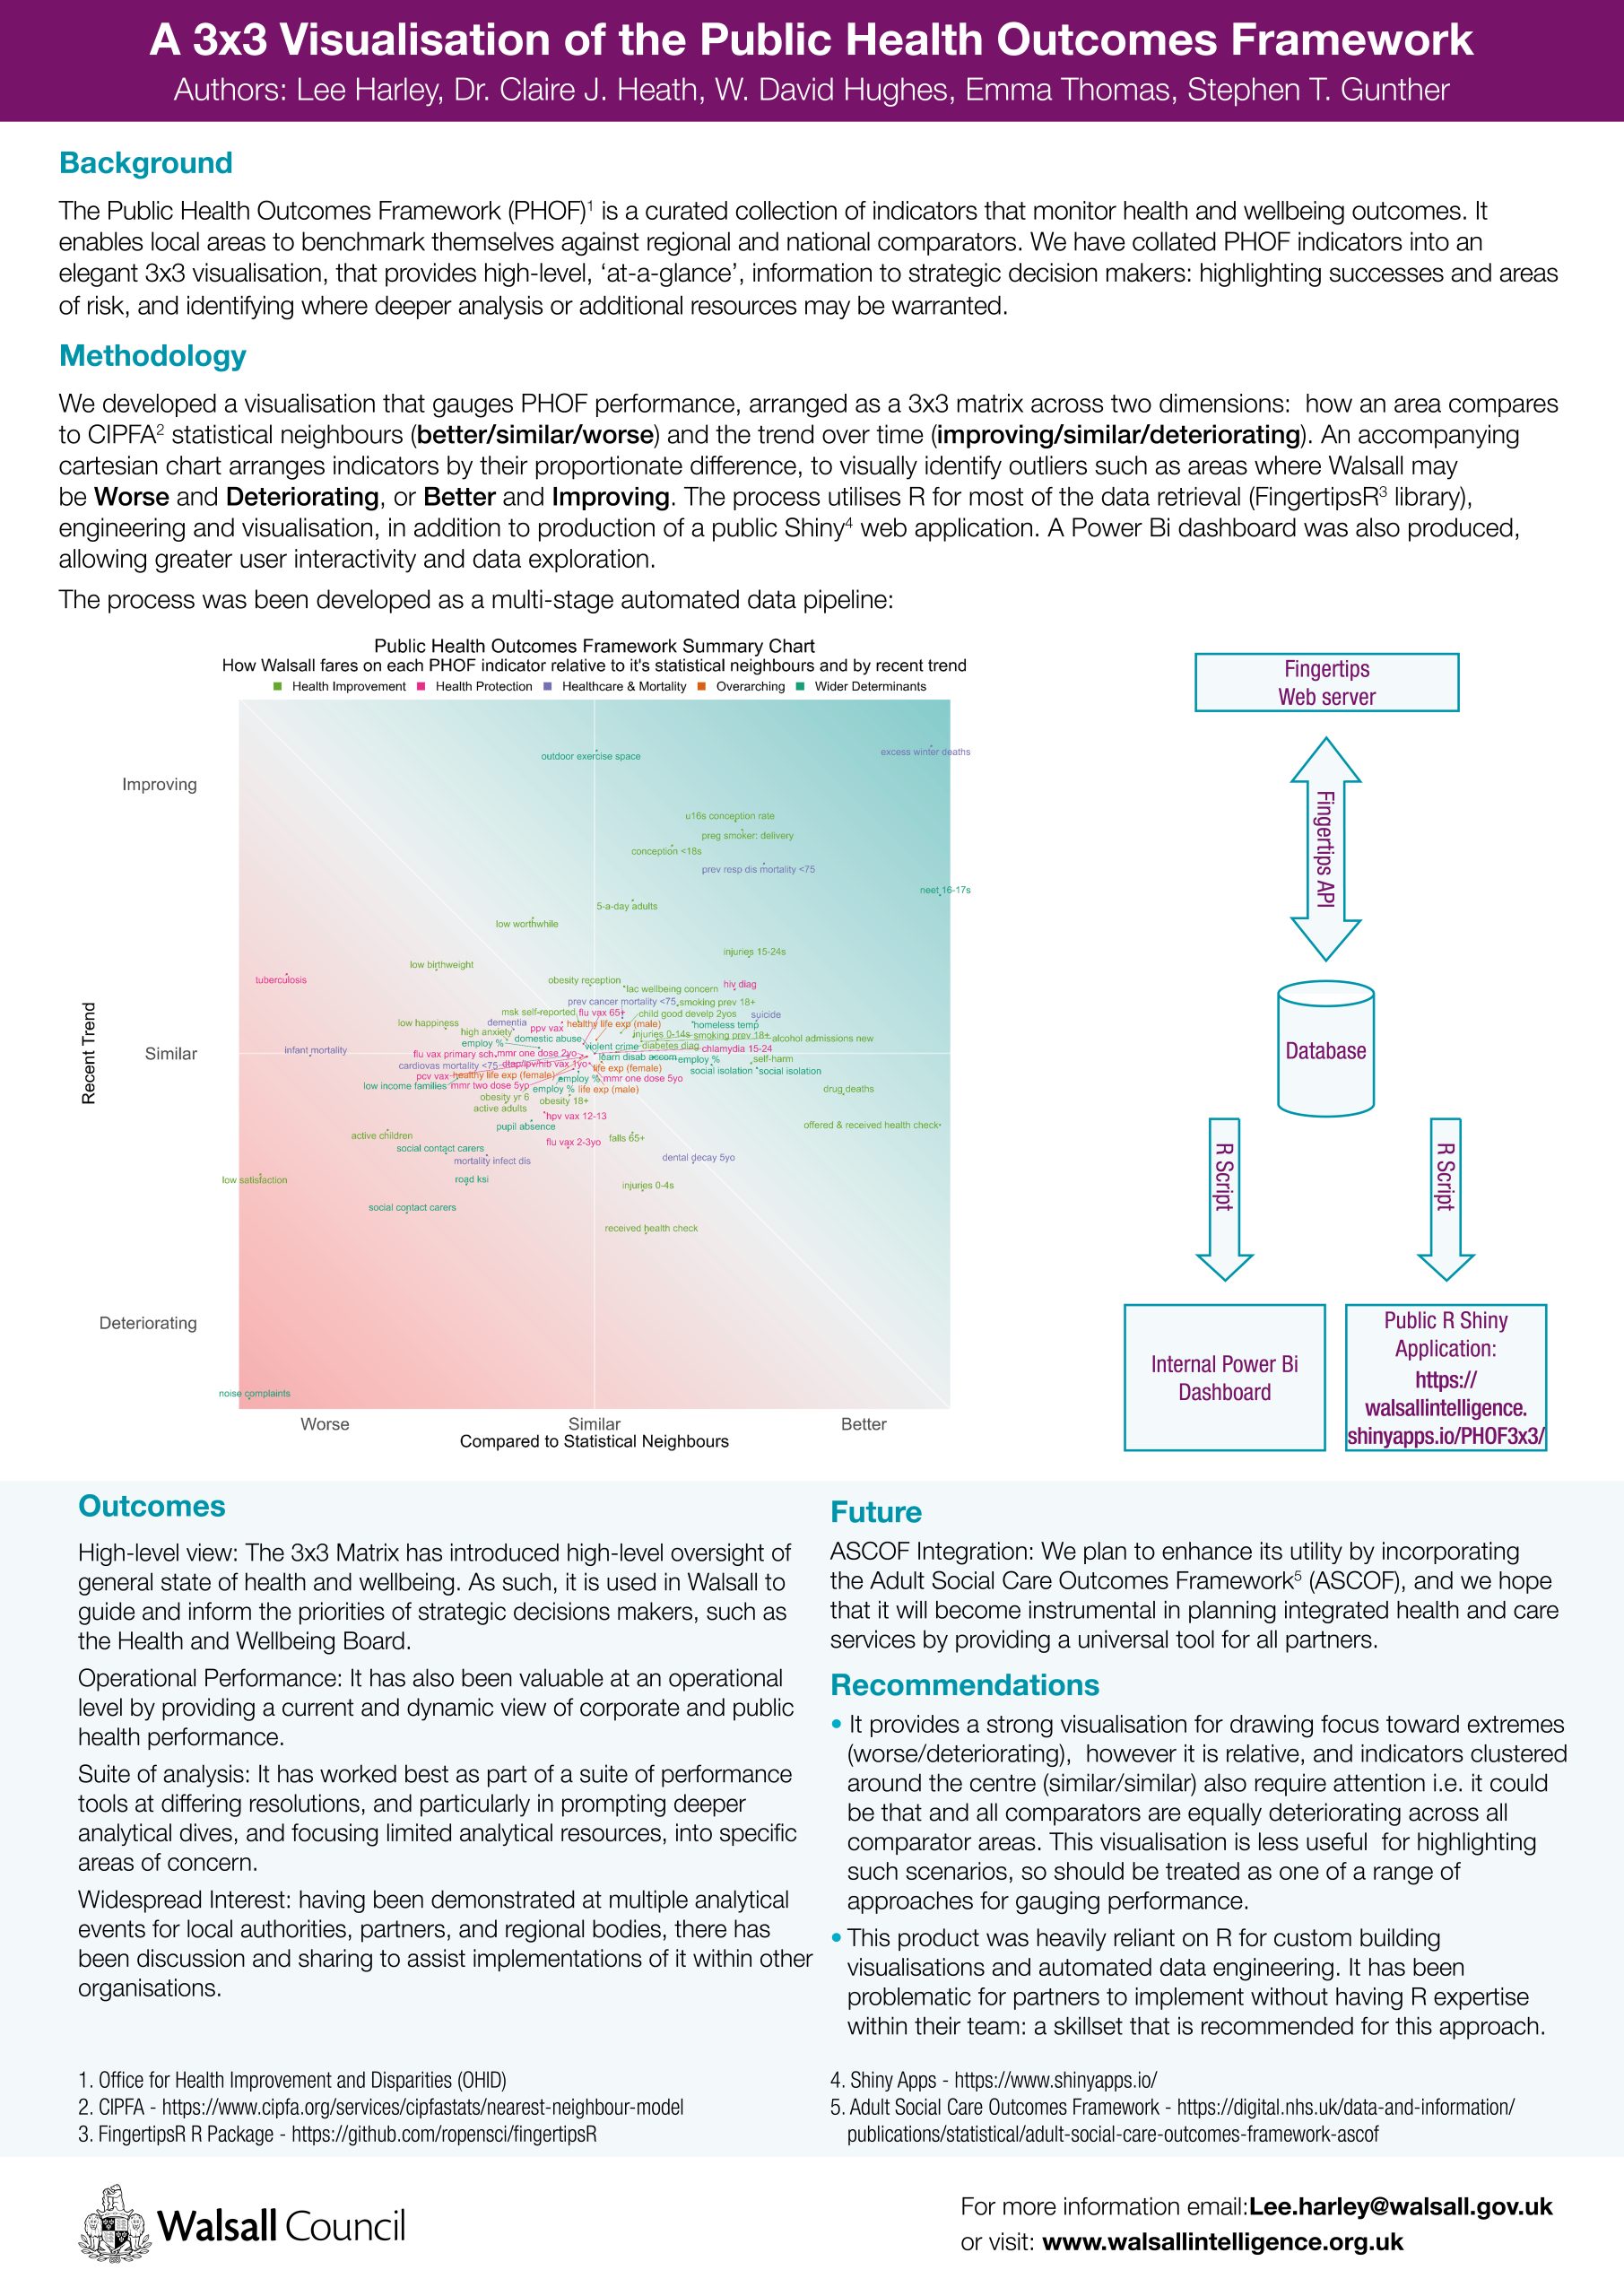 Conference poster for the 3x3 PHOF Framework